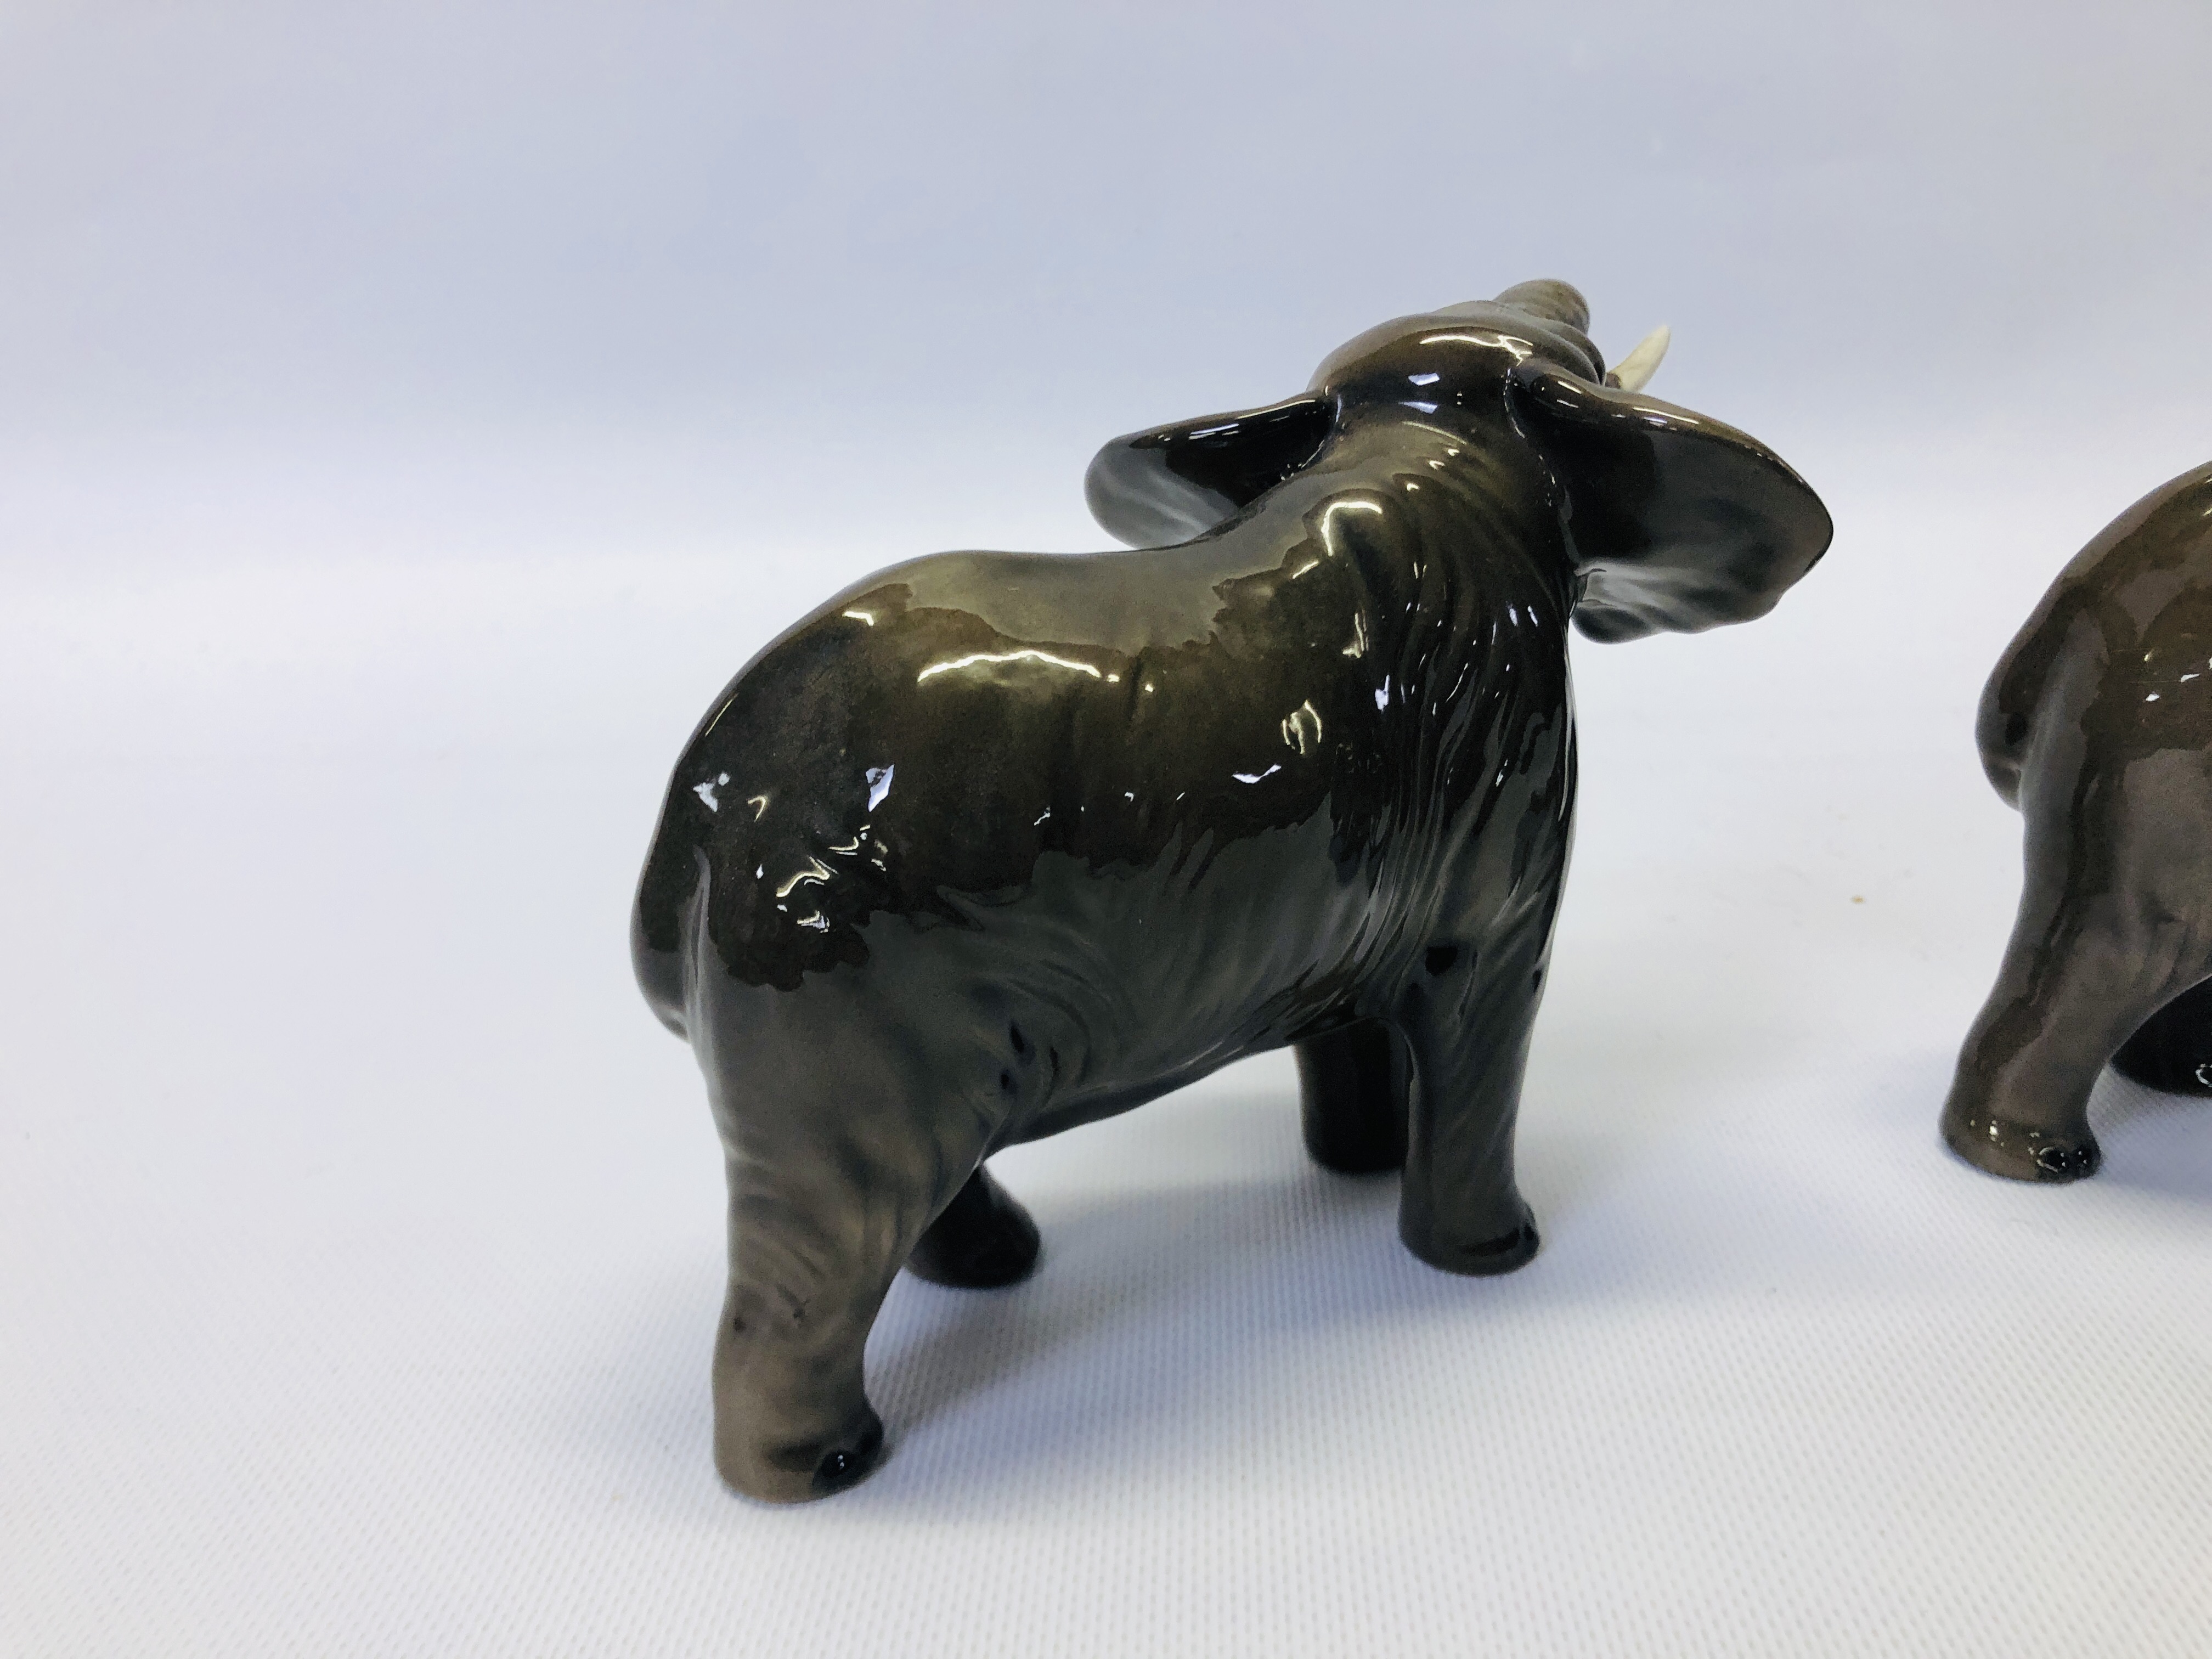 A PAIR OF BESWICK ELEPHANT ORNAMENTS - HEIGHT 12CM. - Image 5 of 7